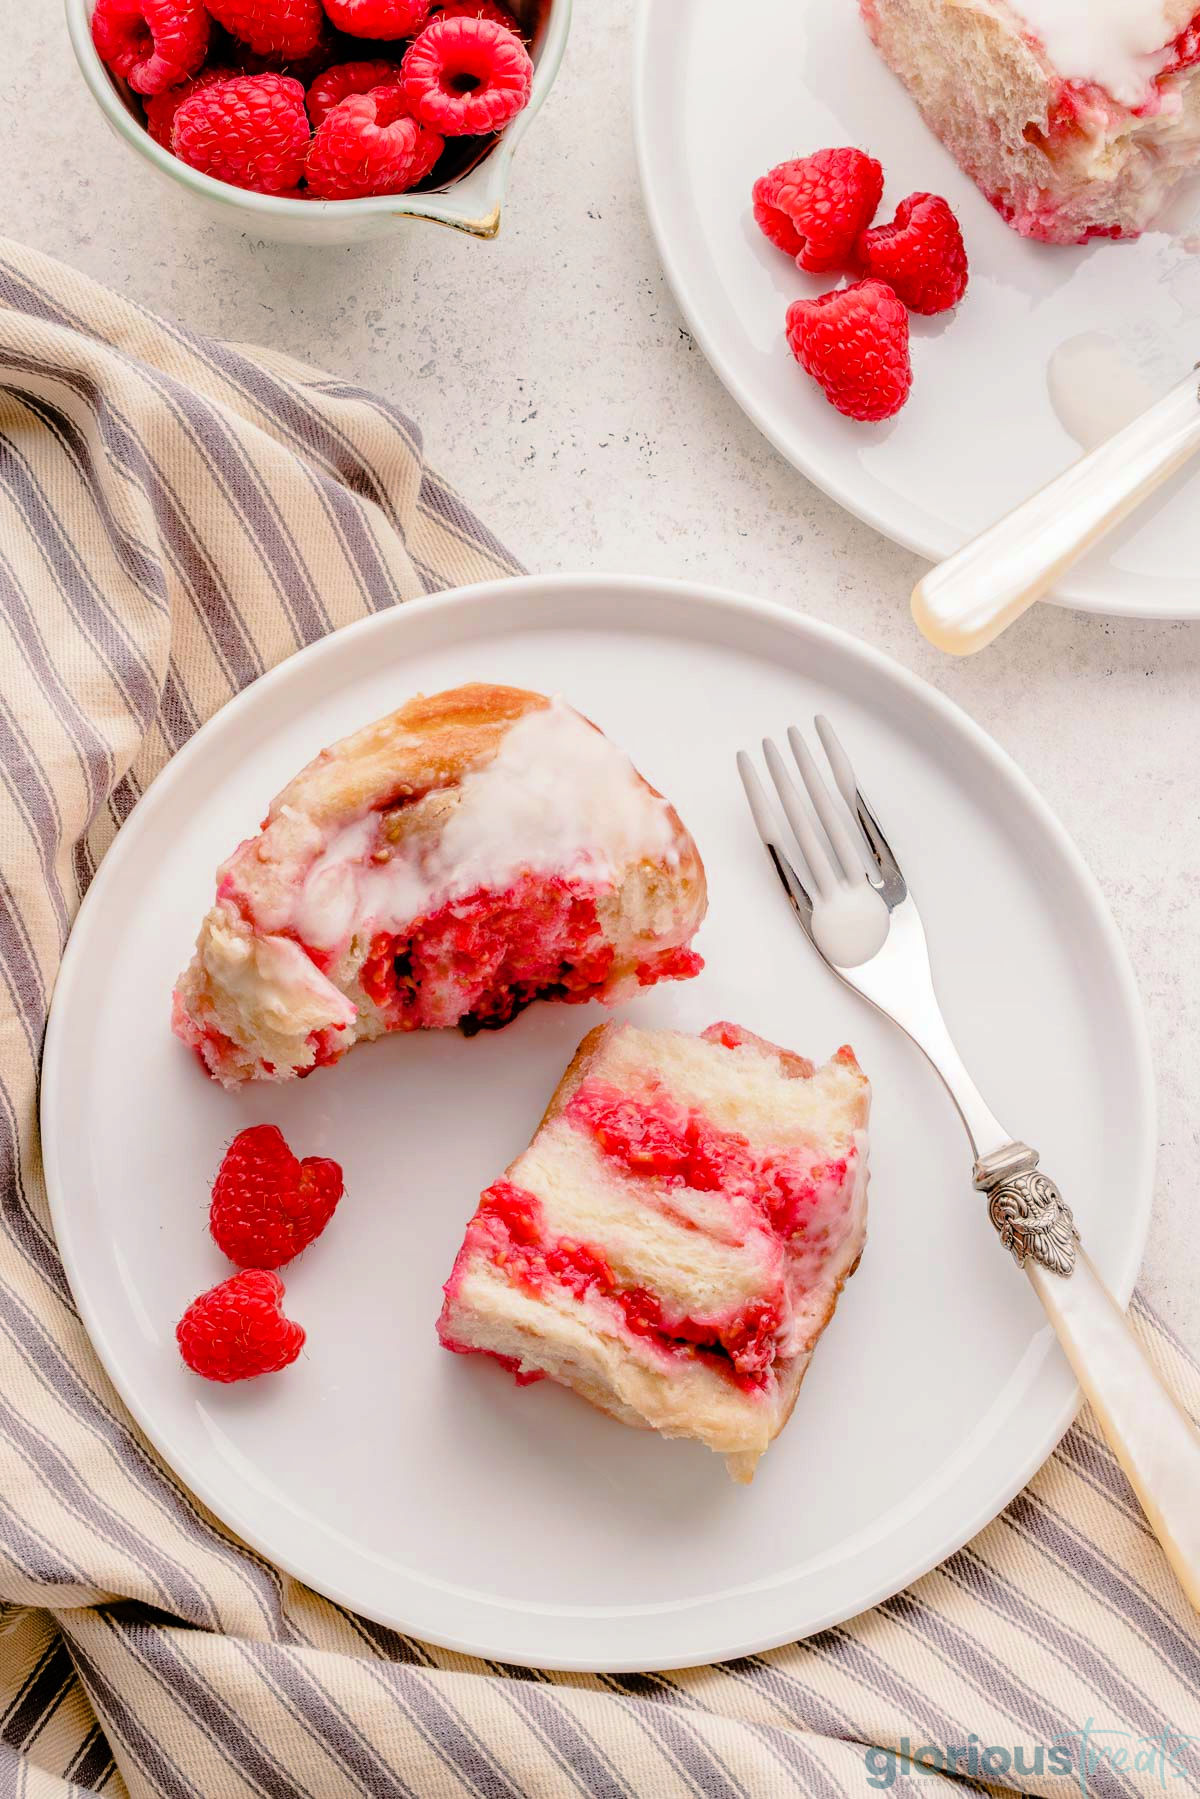 a raspberry sweet roll cut in half and placed on a white plate with raspberries.